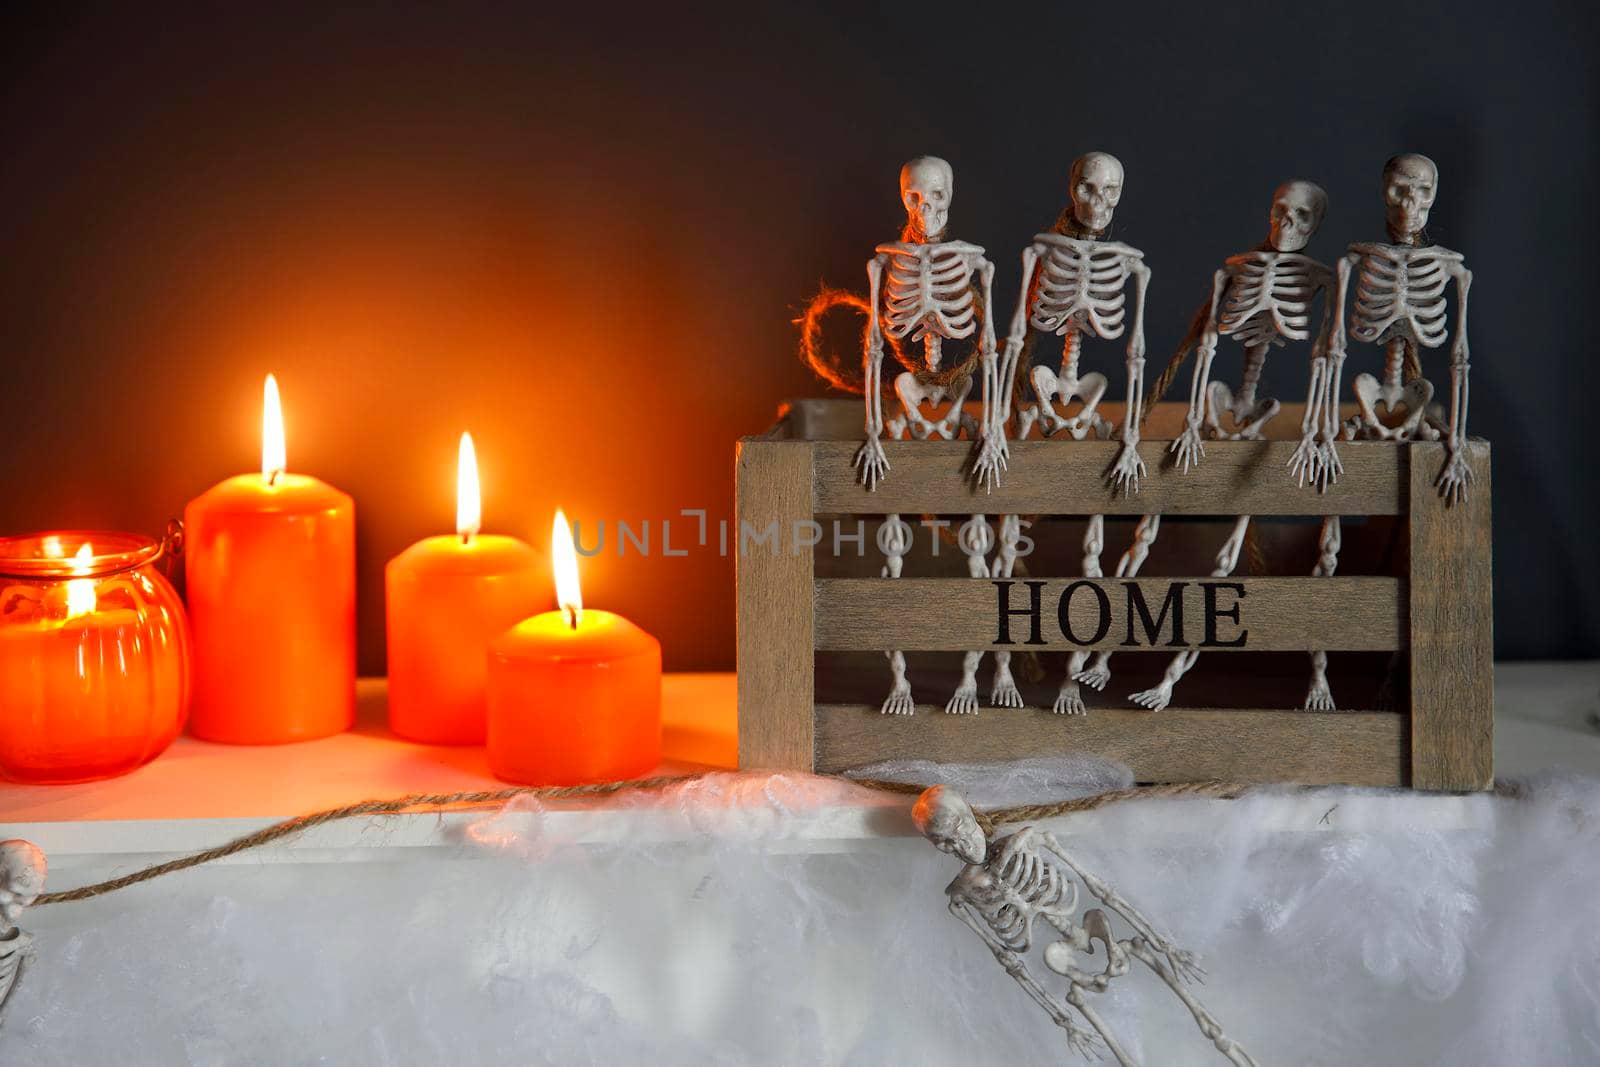 Halloween home decoration. Plastic toy skeletons in wooden box on fireplace against a dark blue wall. garland of skeletons. Cobweb on the dresser. Orange candles and lantern. by elenarostunova